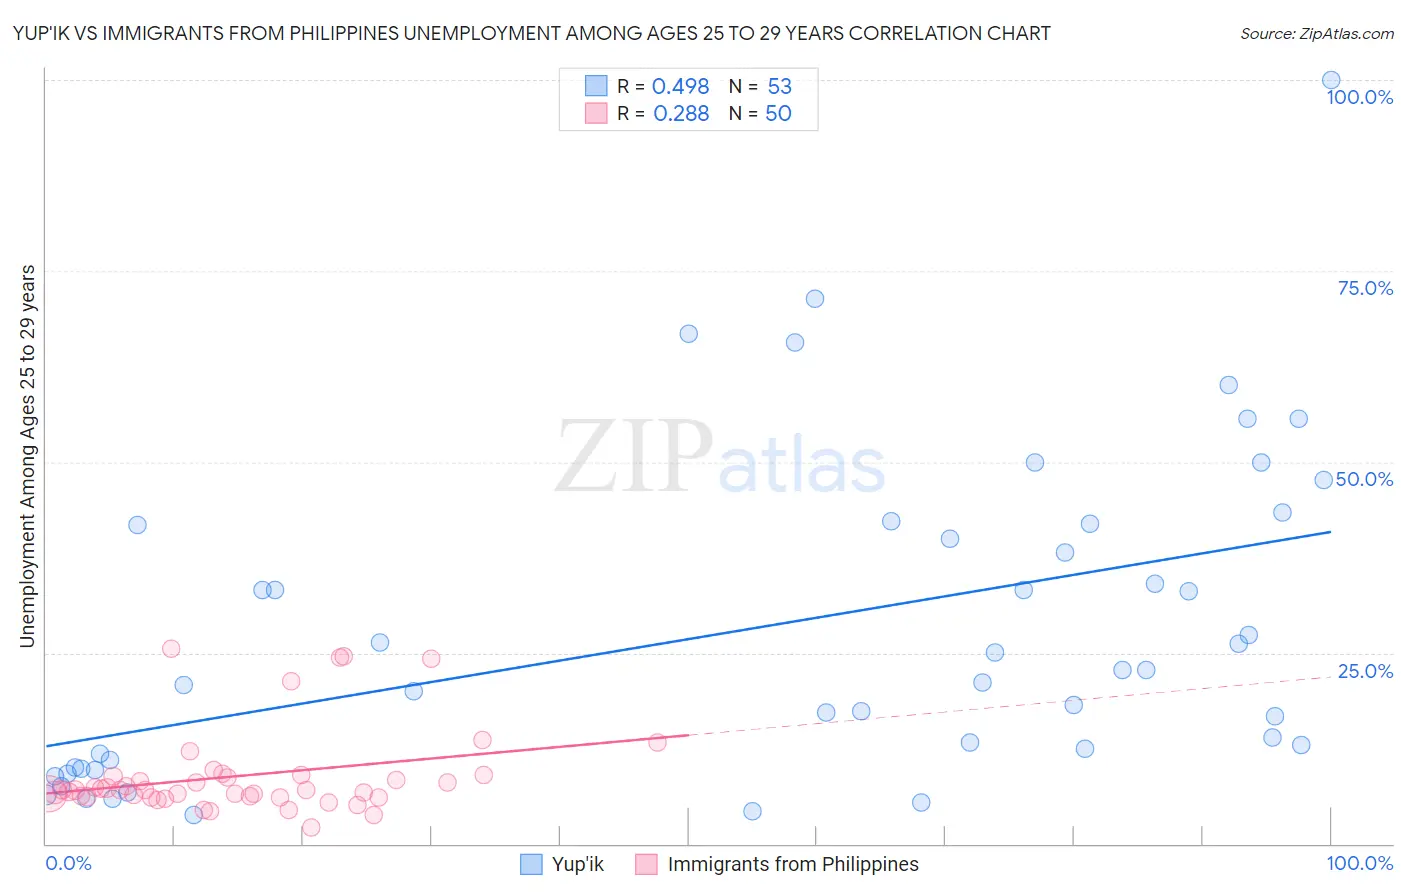 Yup'ik vs Immigrants from Philippines Unemployment Among Ages 25 to 29 years